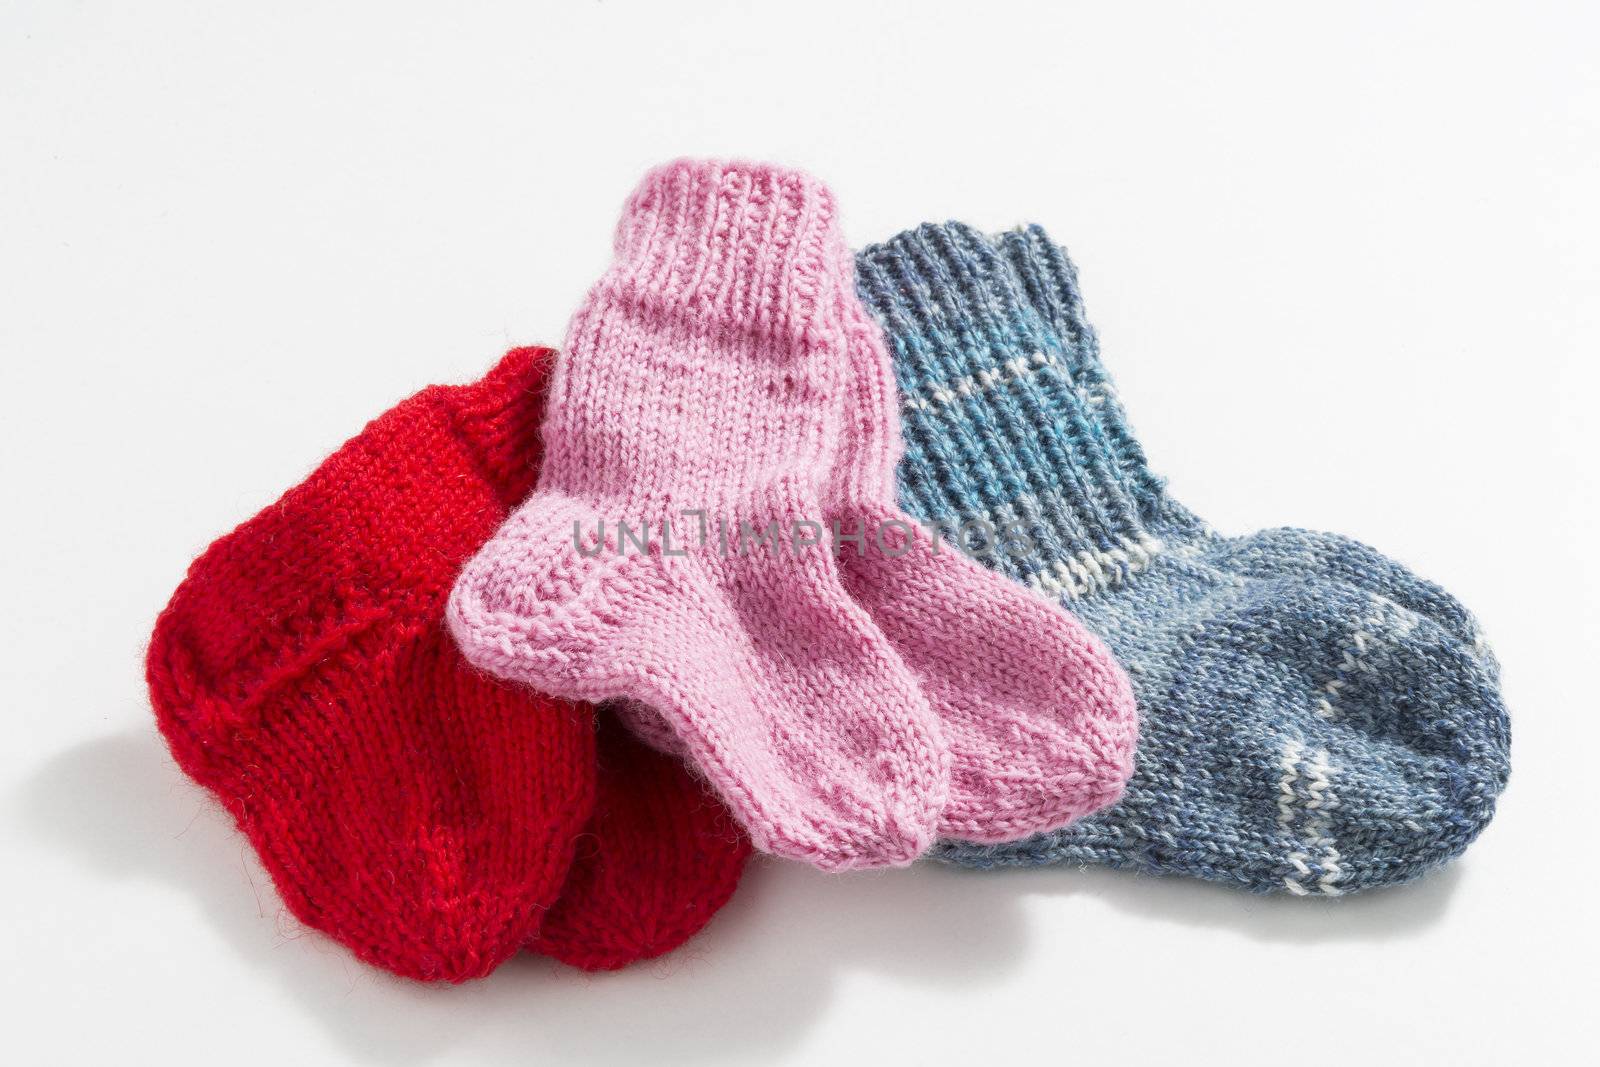 Hand-knitted baby socks by w20er